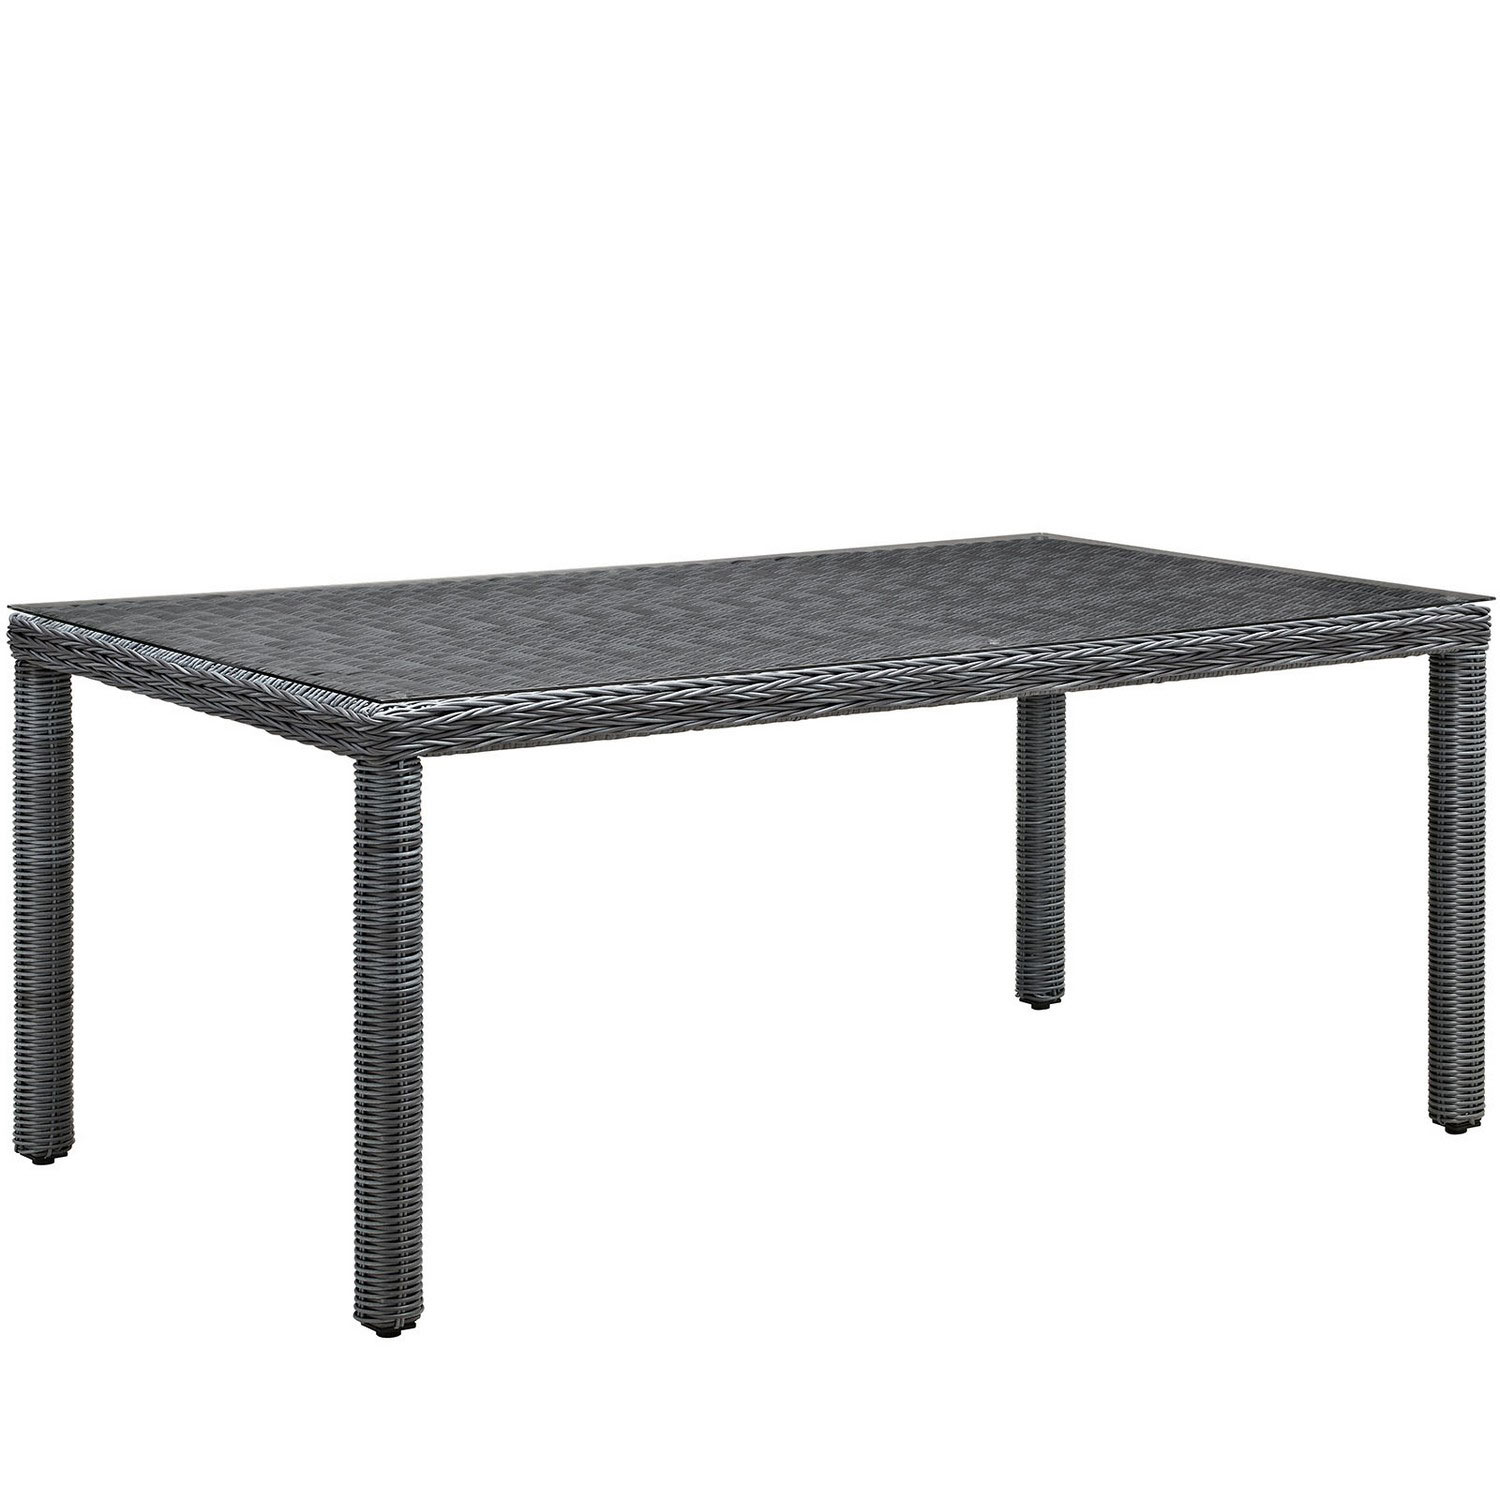 Modway Summon 70-inch Outdoor Patio Dining Table - Gray